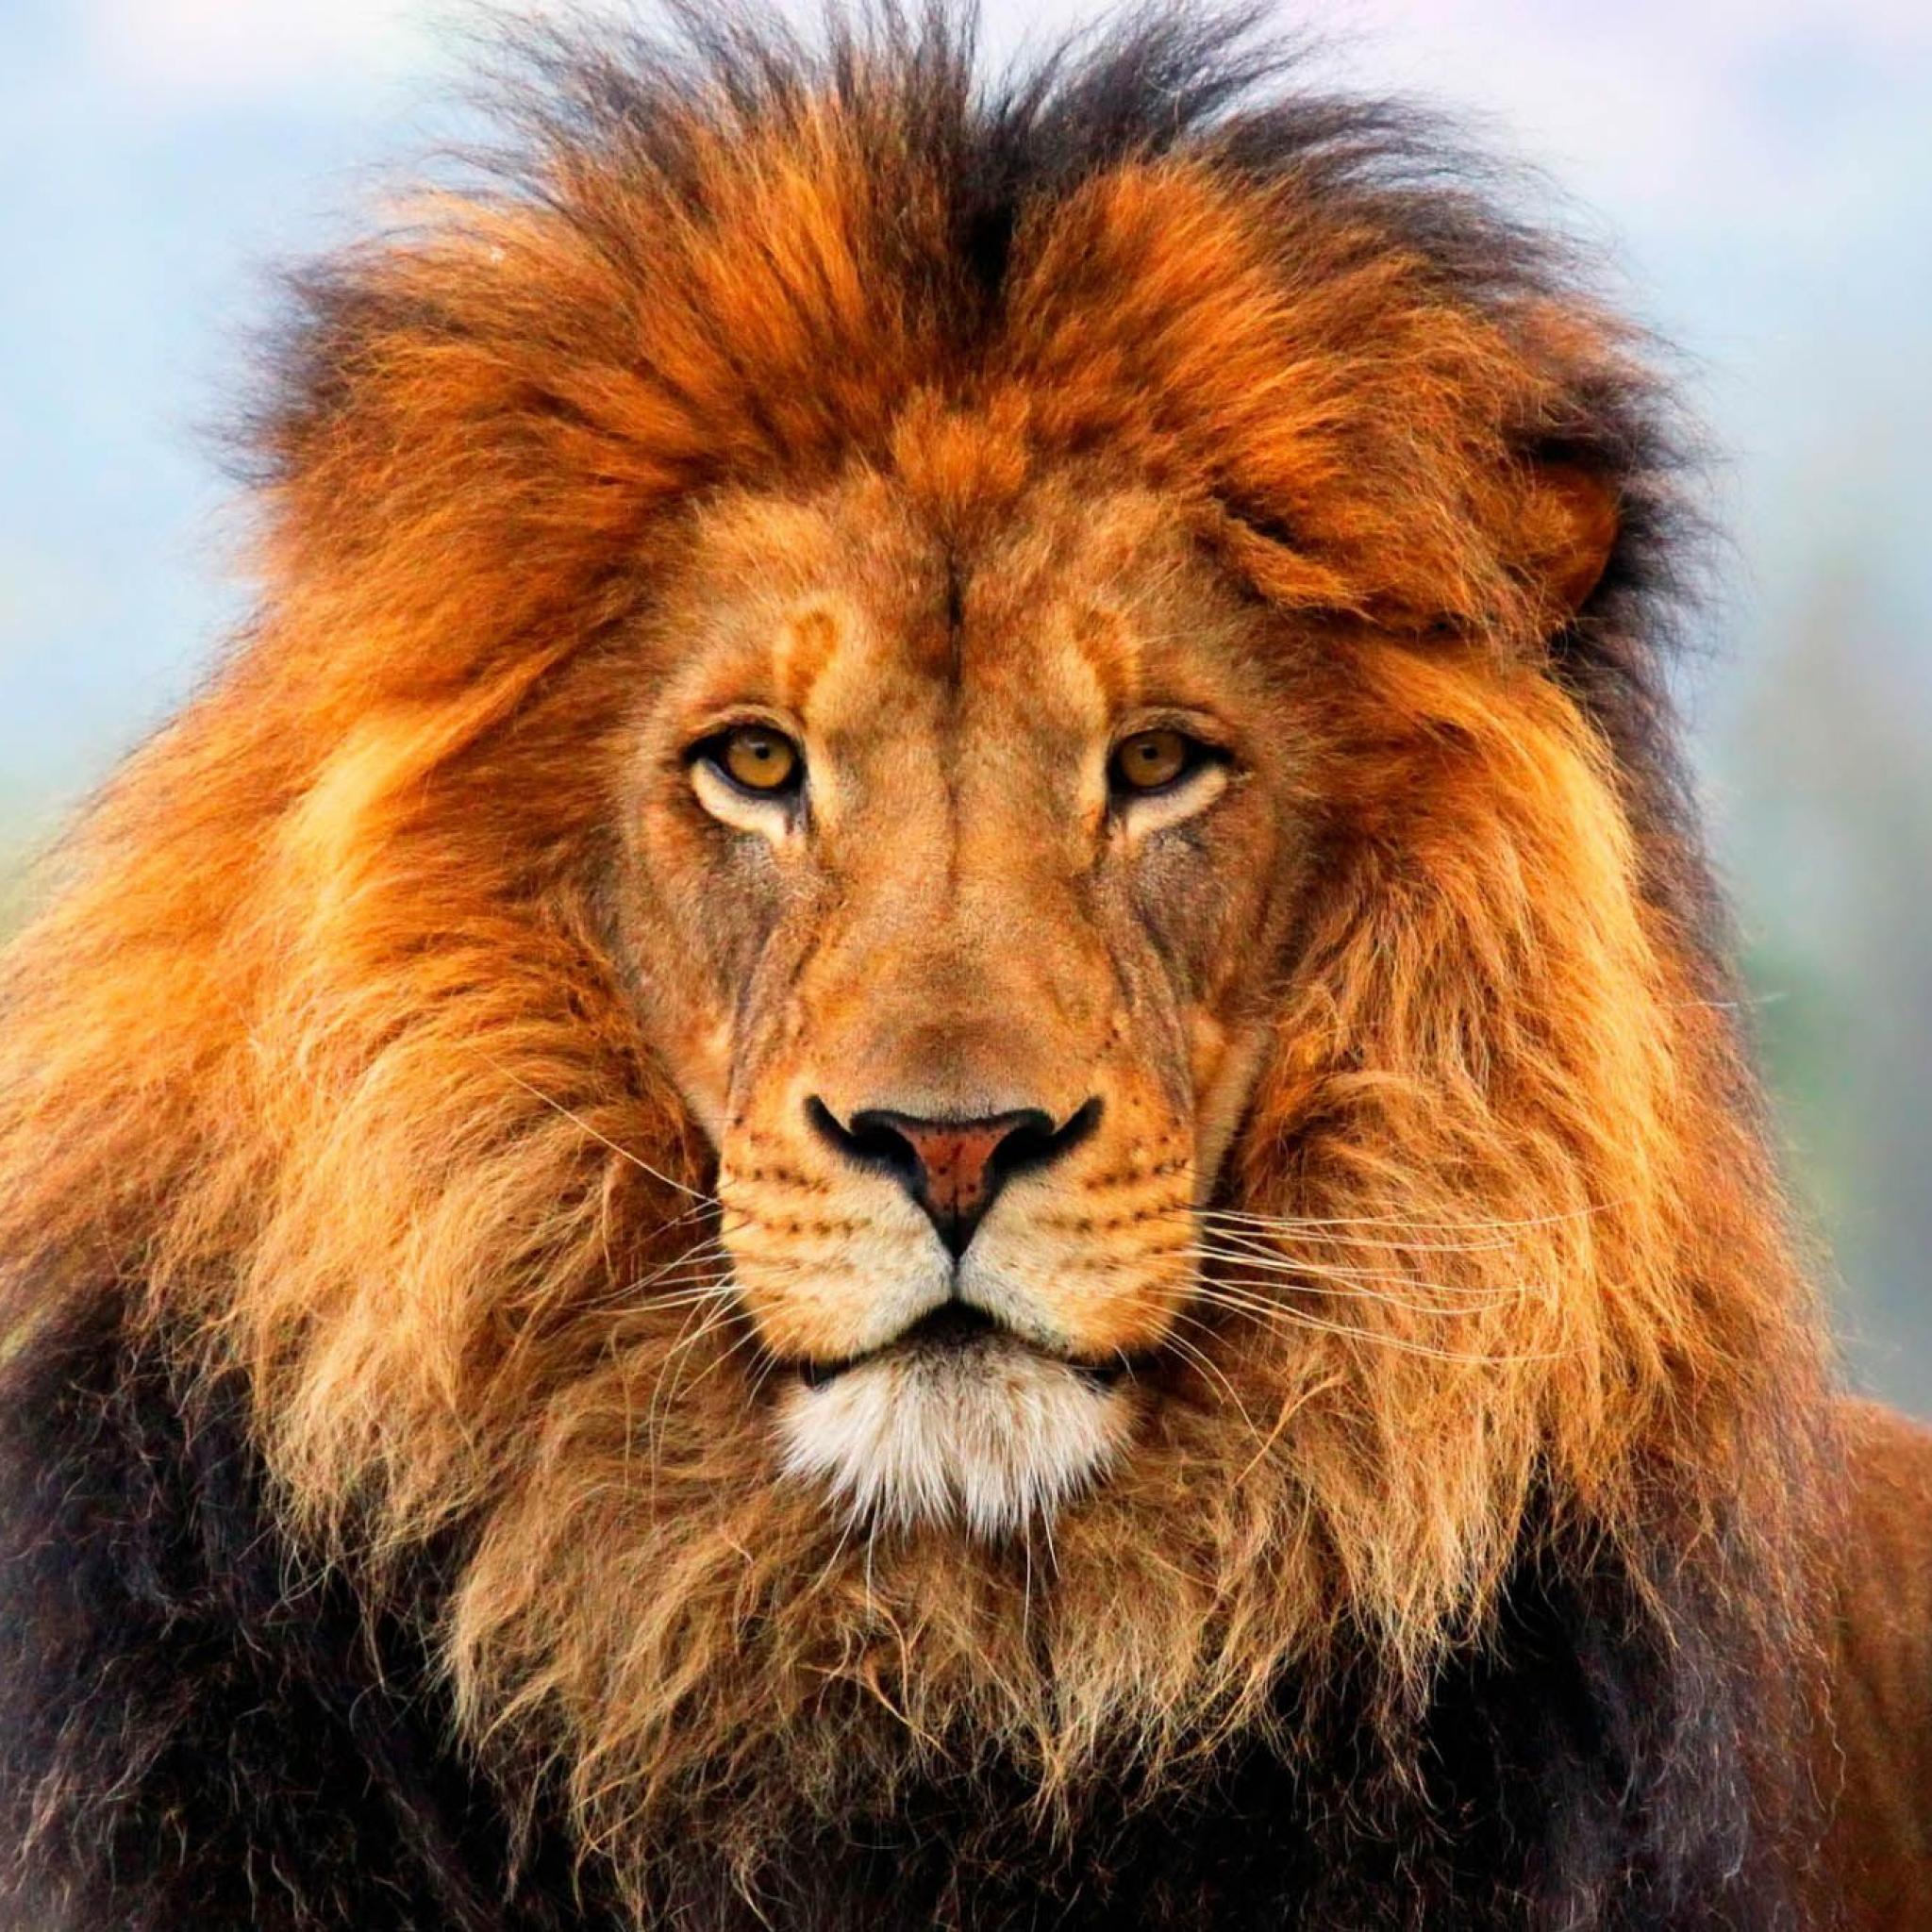 How closely related is a domestic cat to a lion?